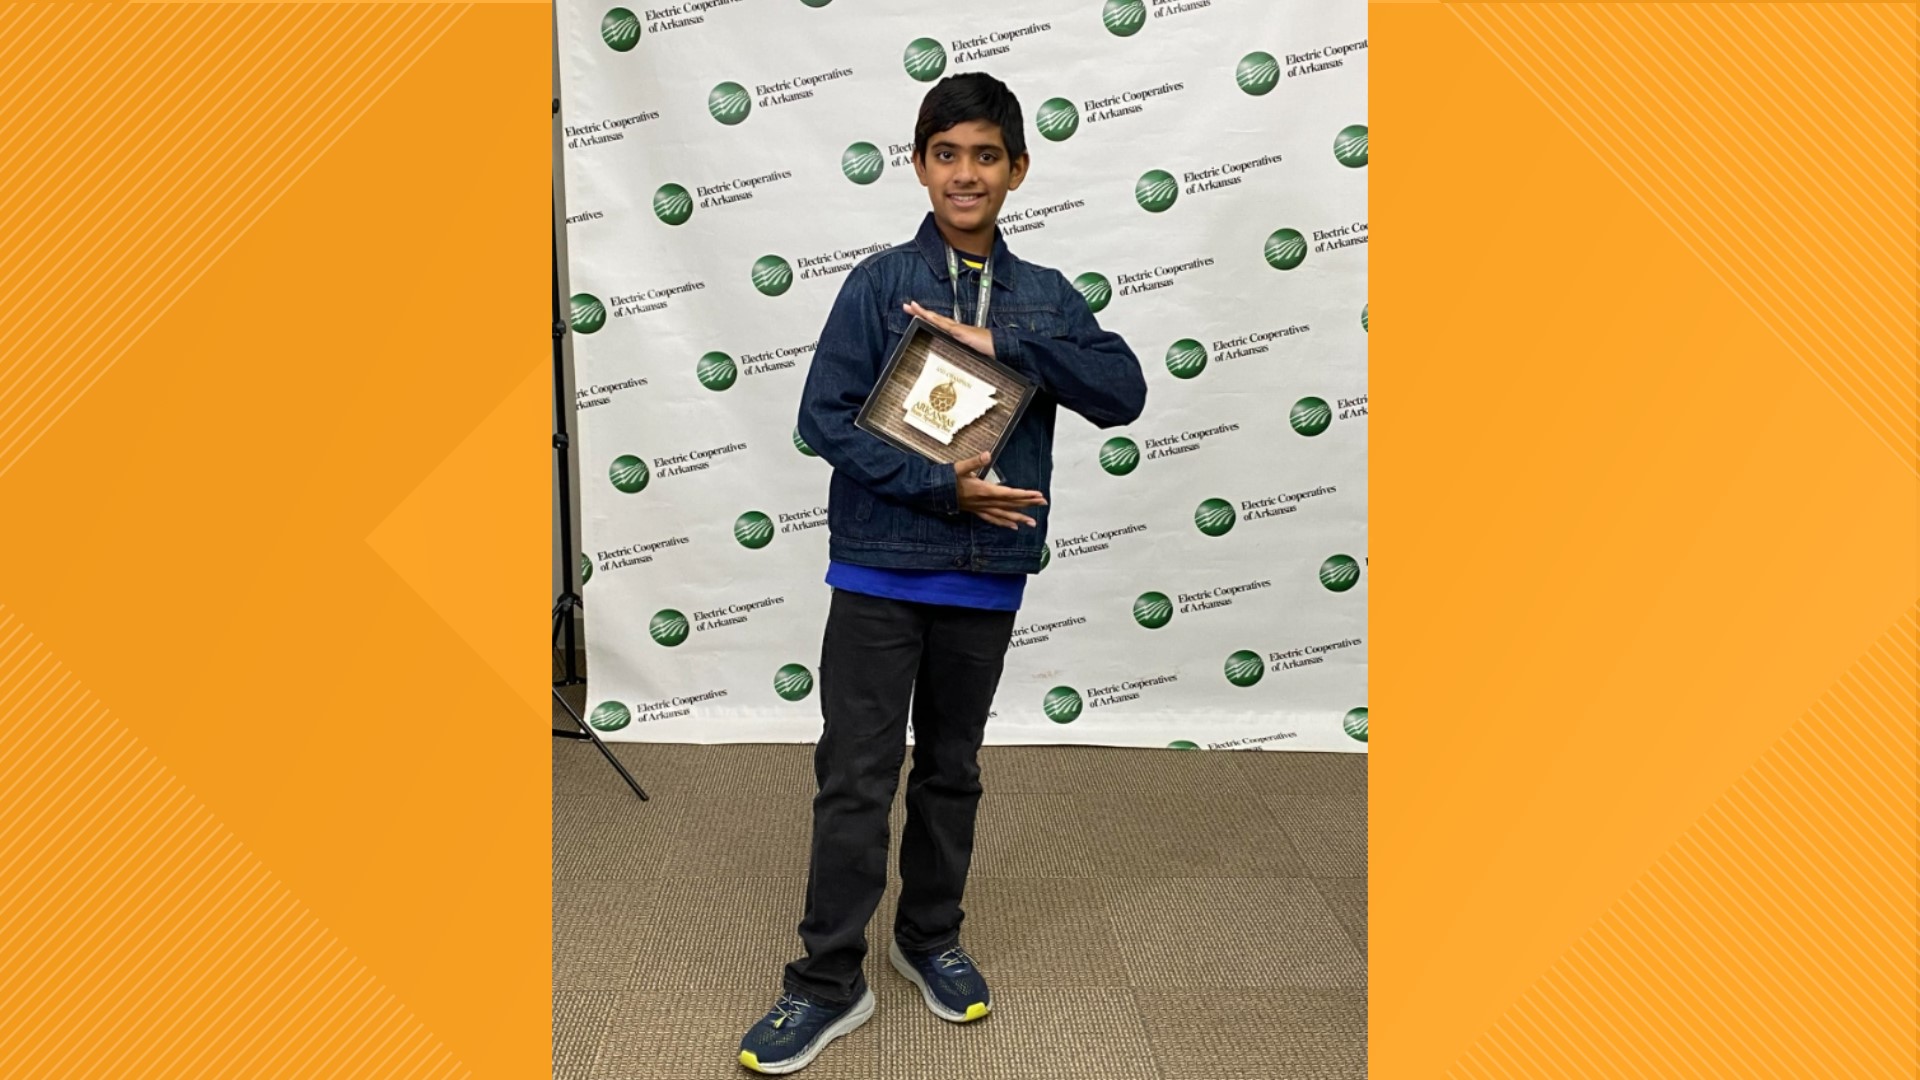 Zeeshan Anower from Woods Elementary took home the award Saturday, March 11.